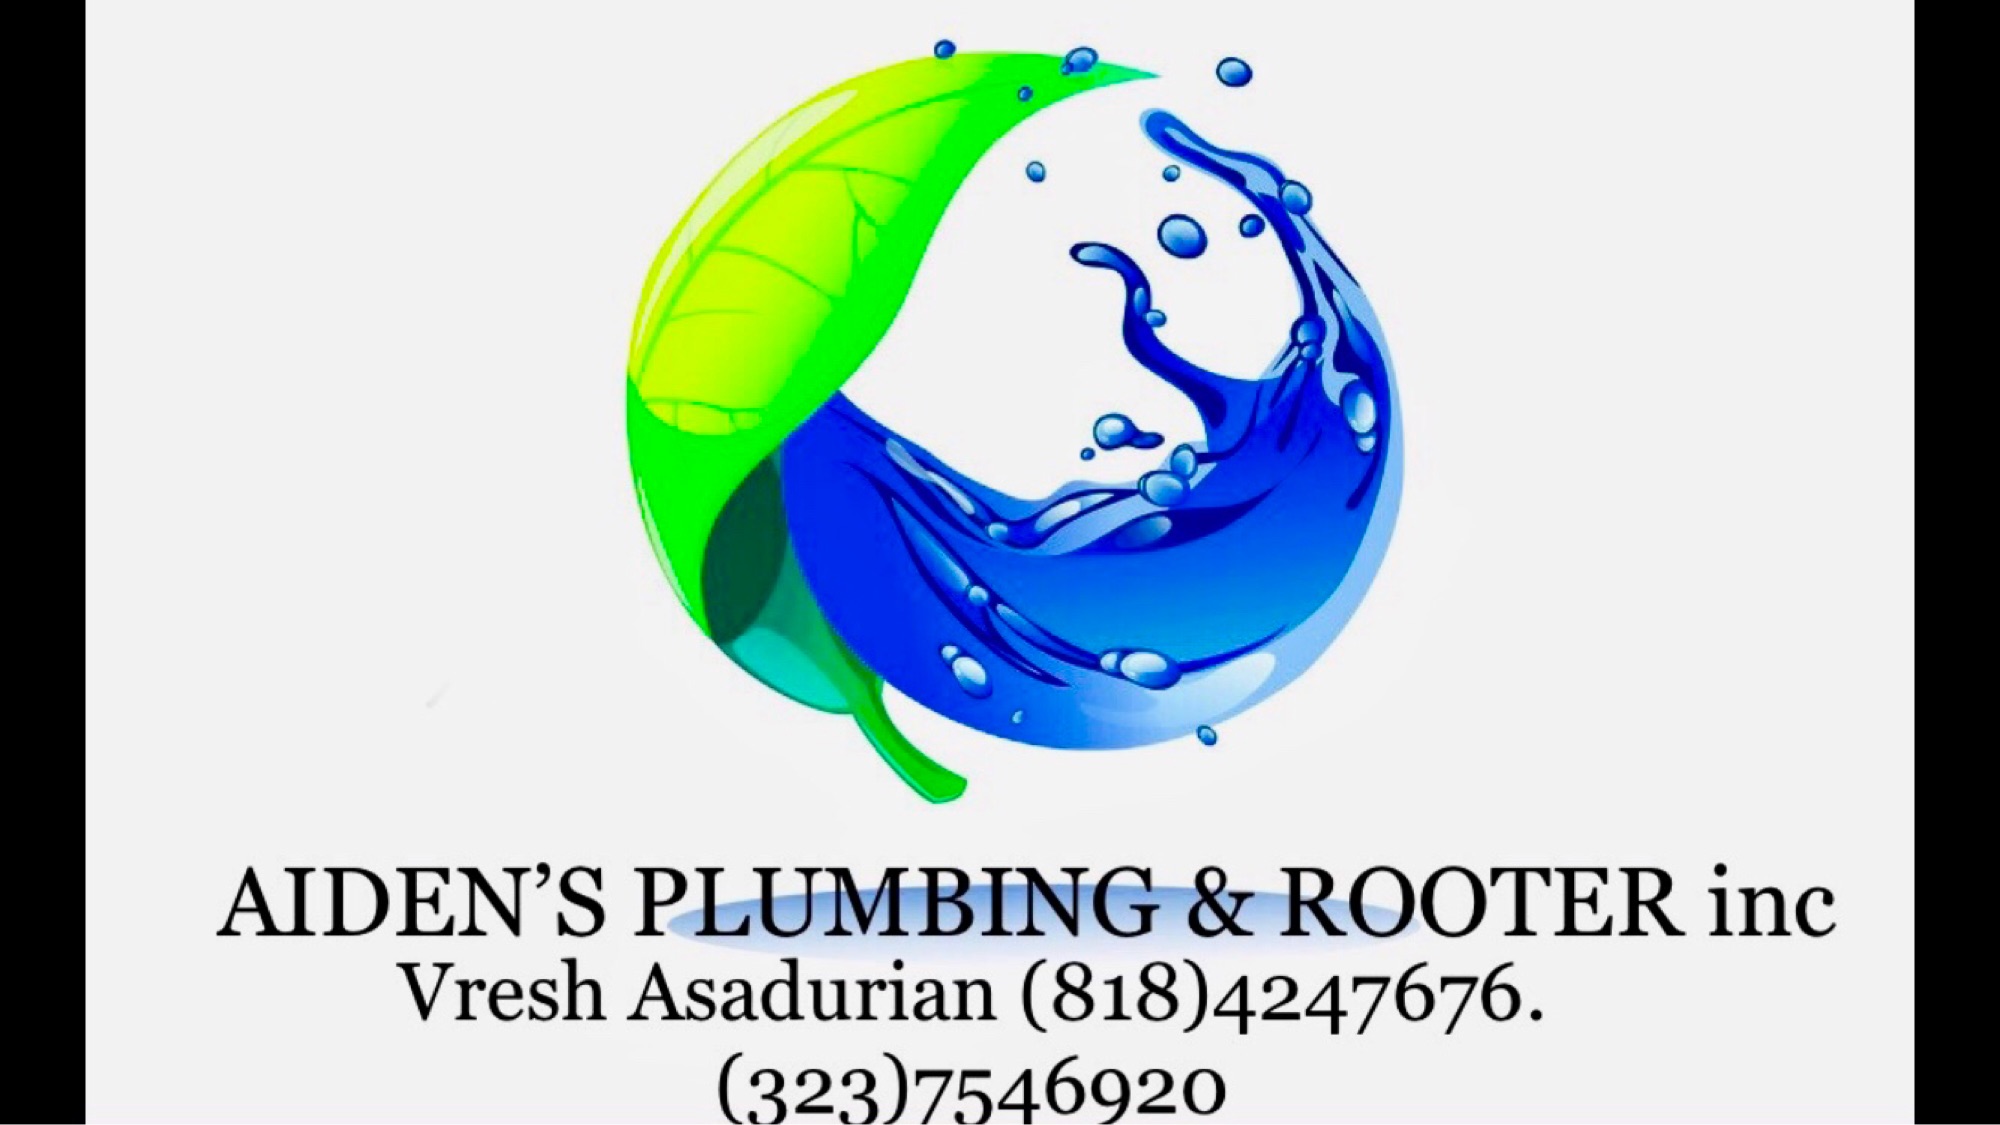 Aiden's Plumbing and Rooter Logo